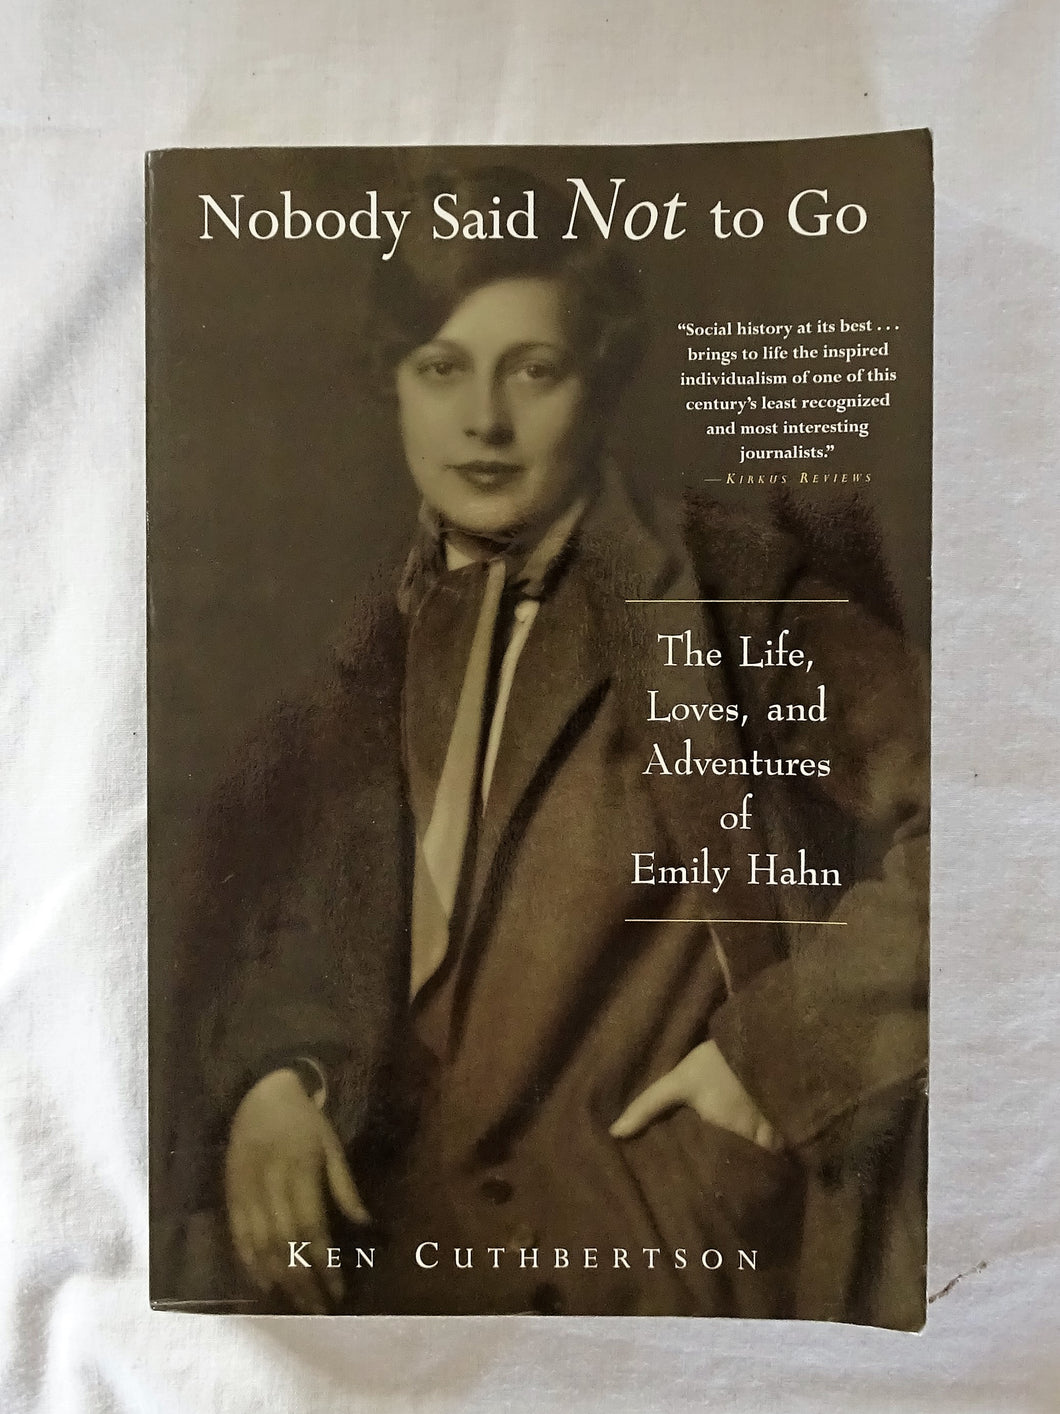 Nobody Said Not to Go  The Life, Loves, and Adventures of Emily Hahn  by Ken Cuthbertson